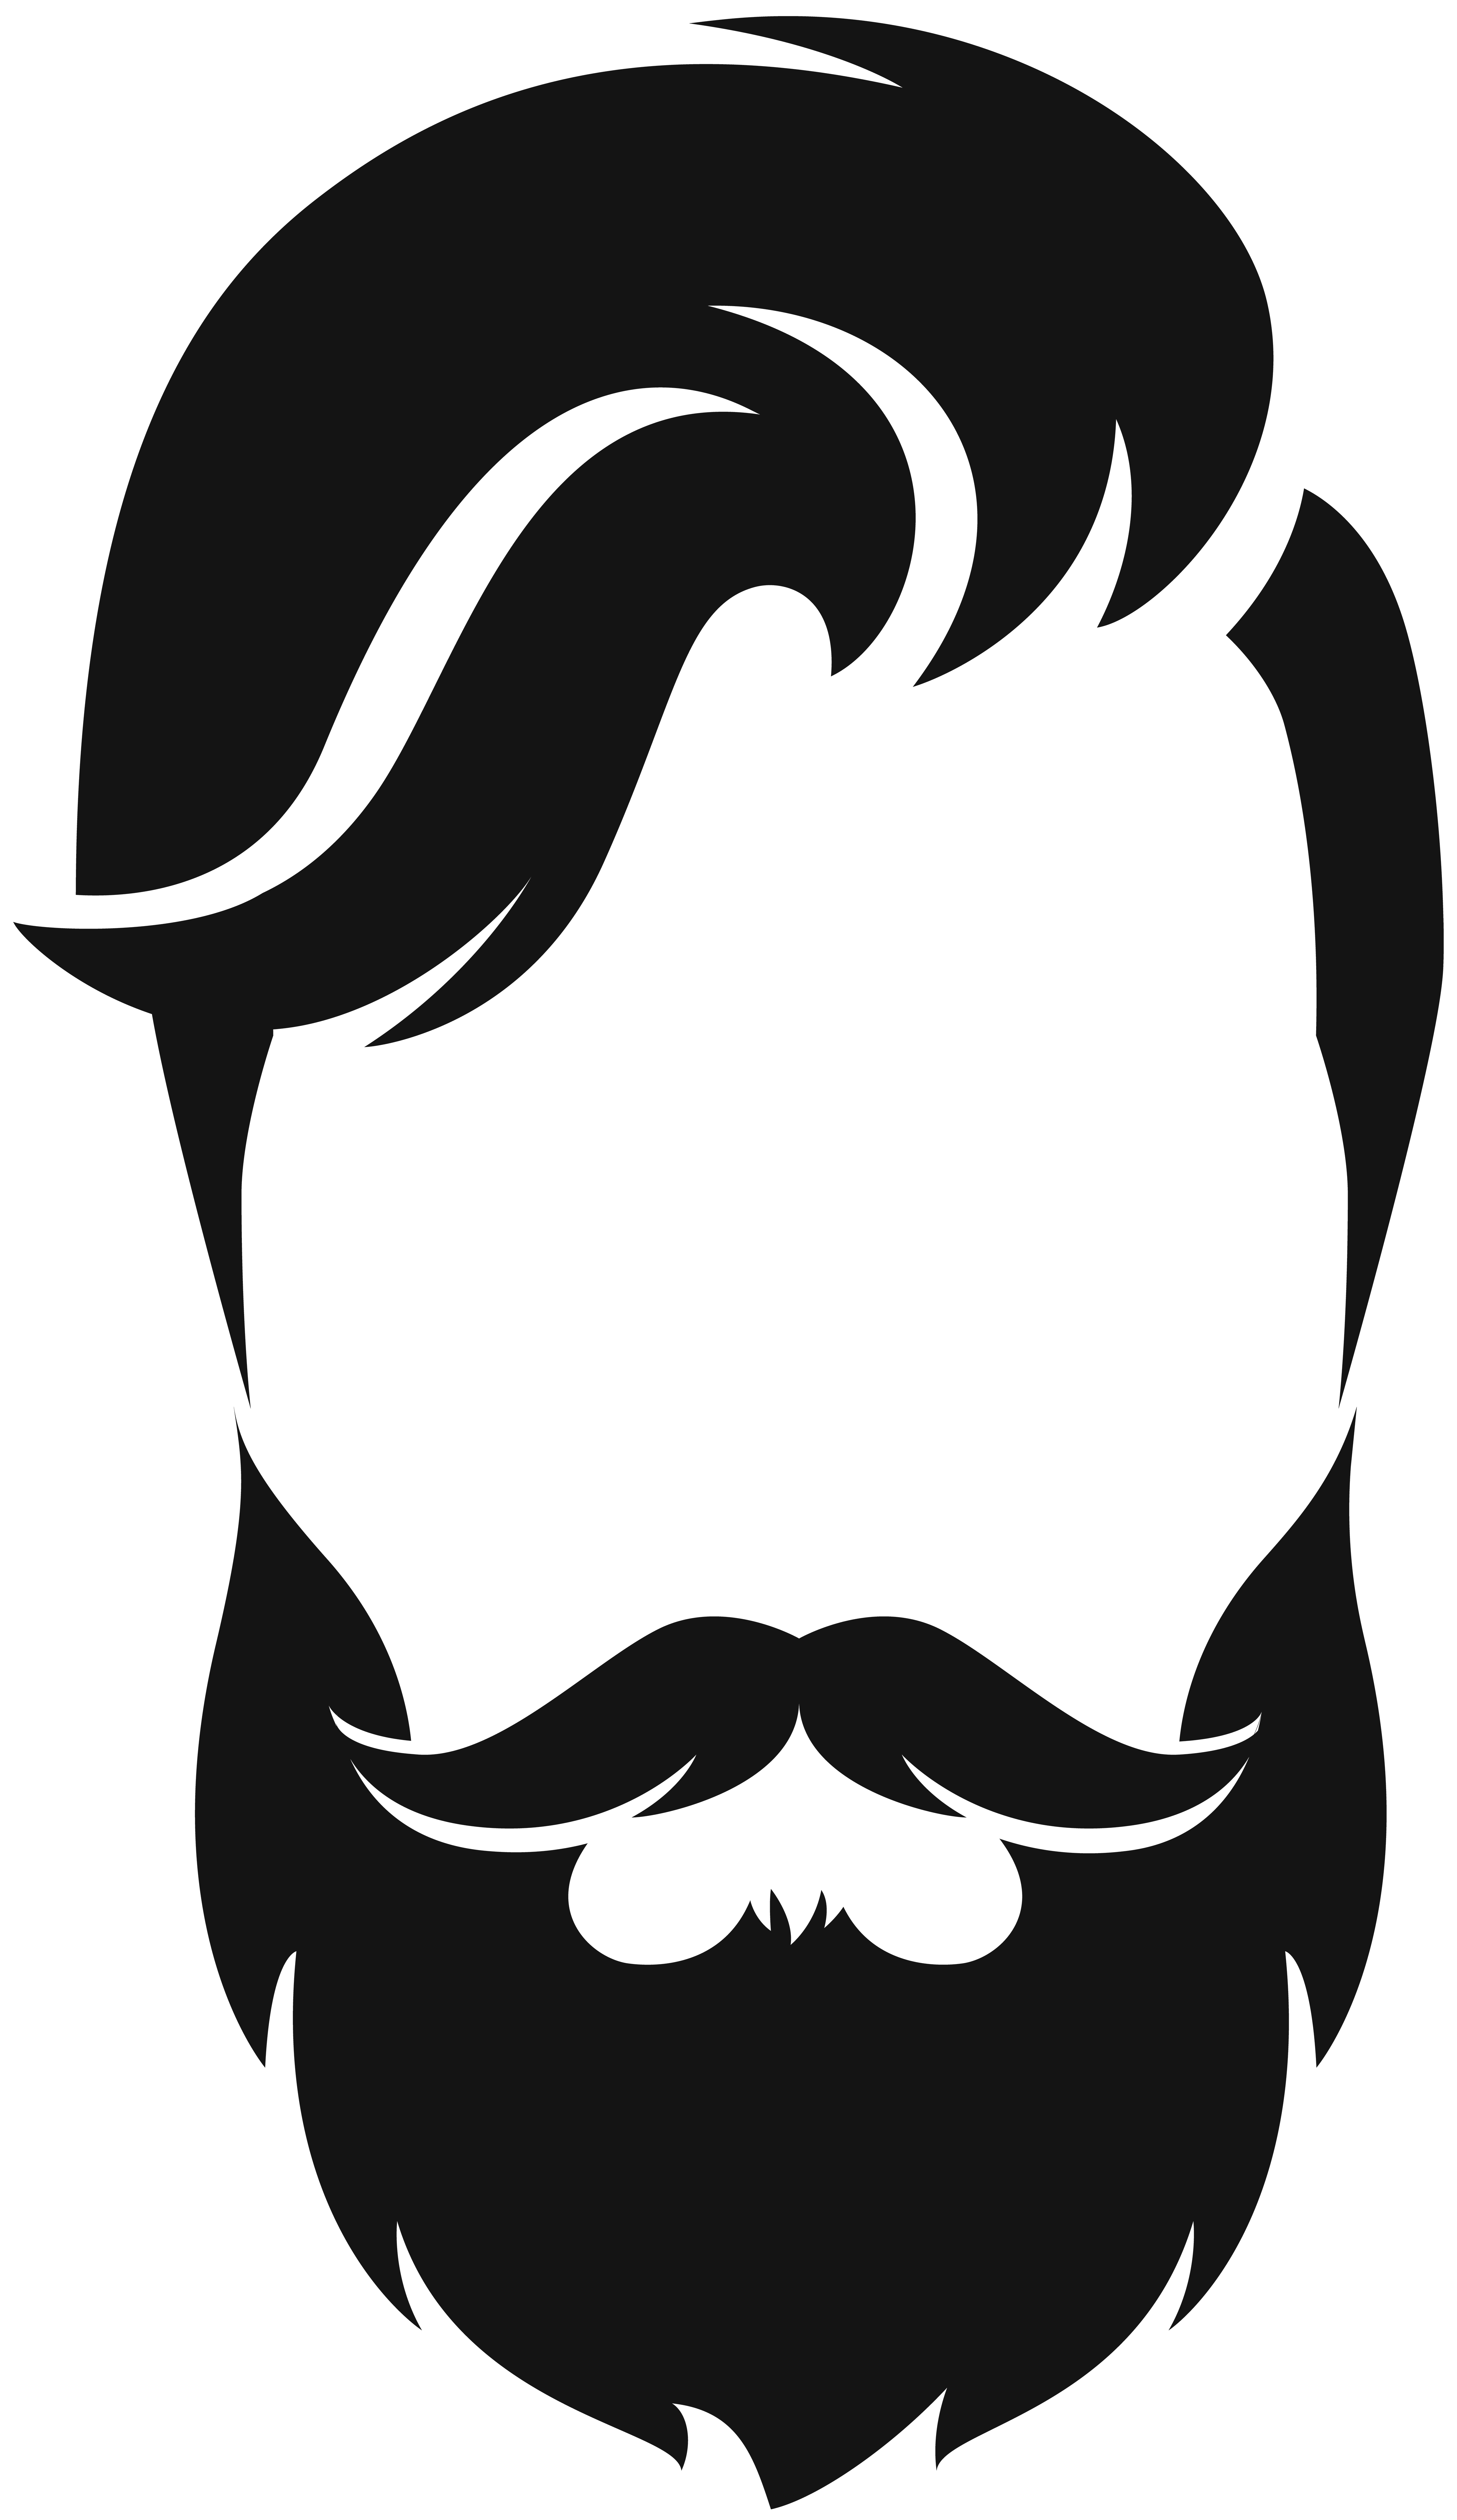 Silhouette Beard Moustache Clip art - hair style png download - 4626*8000 -  Free Transparent Silhouette png Download. - Clip Art Library